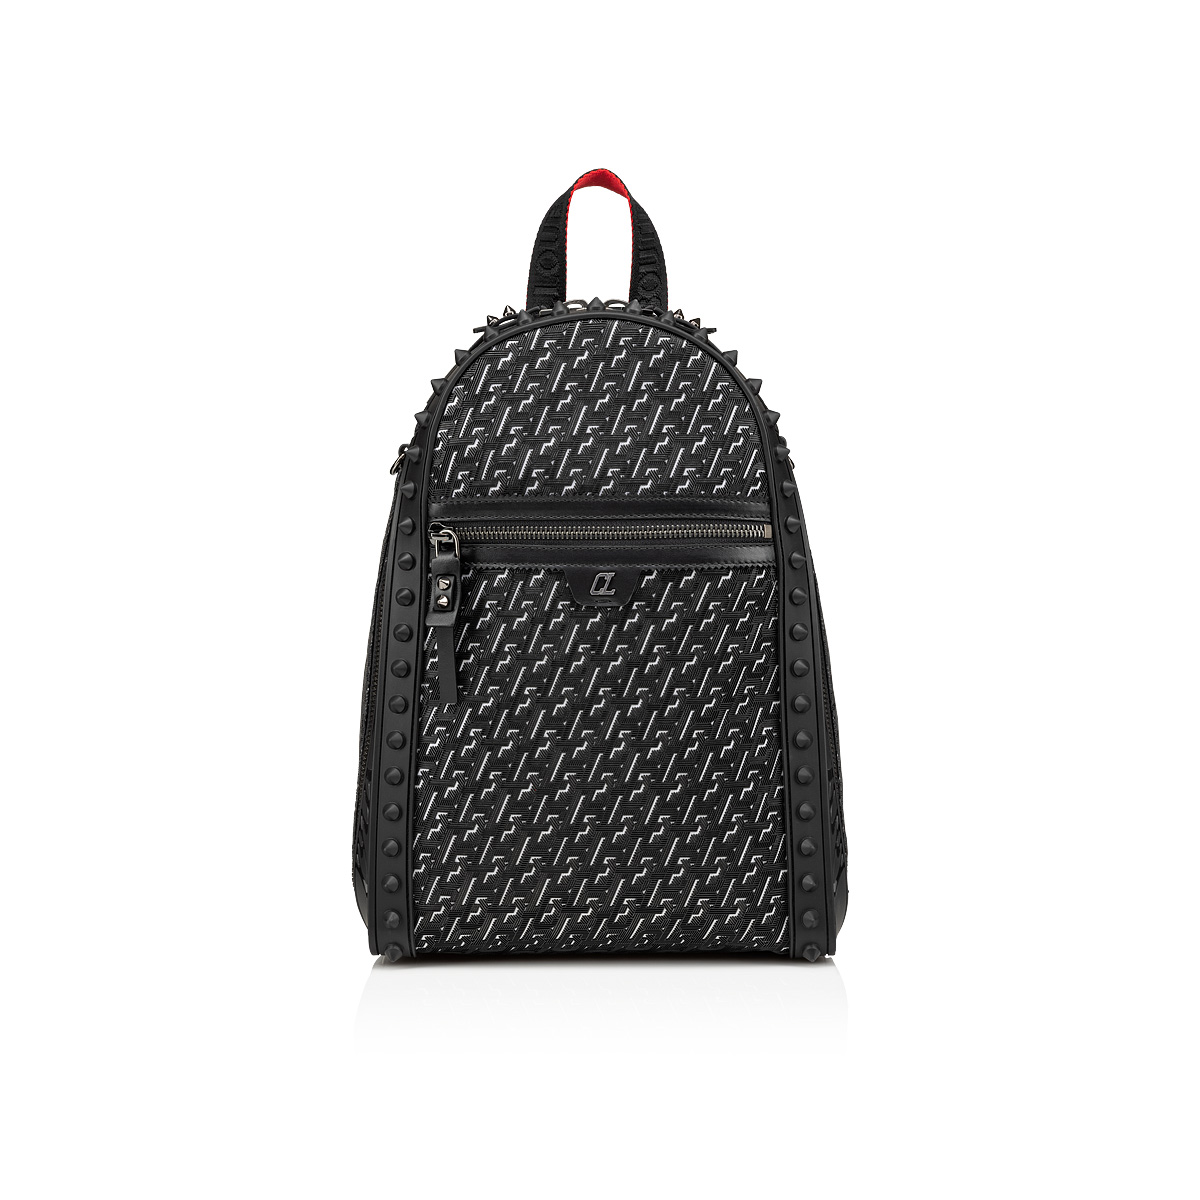 Sneakender medium - Travel Bag - Coated canva Techno CL and rubber - Black  - Christian Louboutin